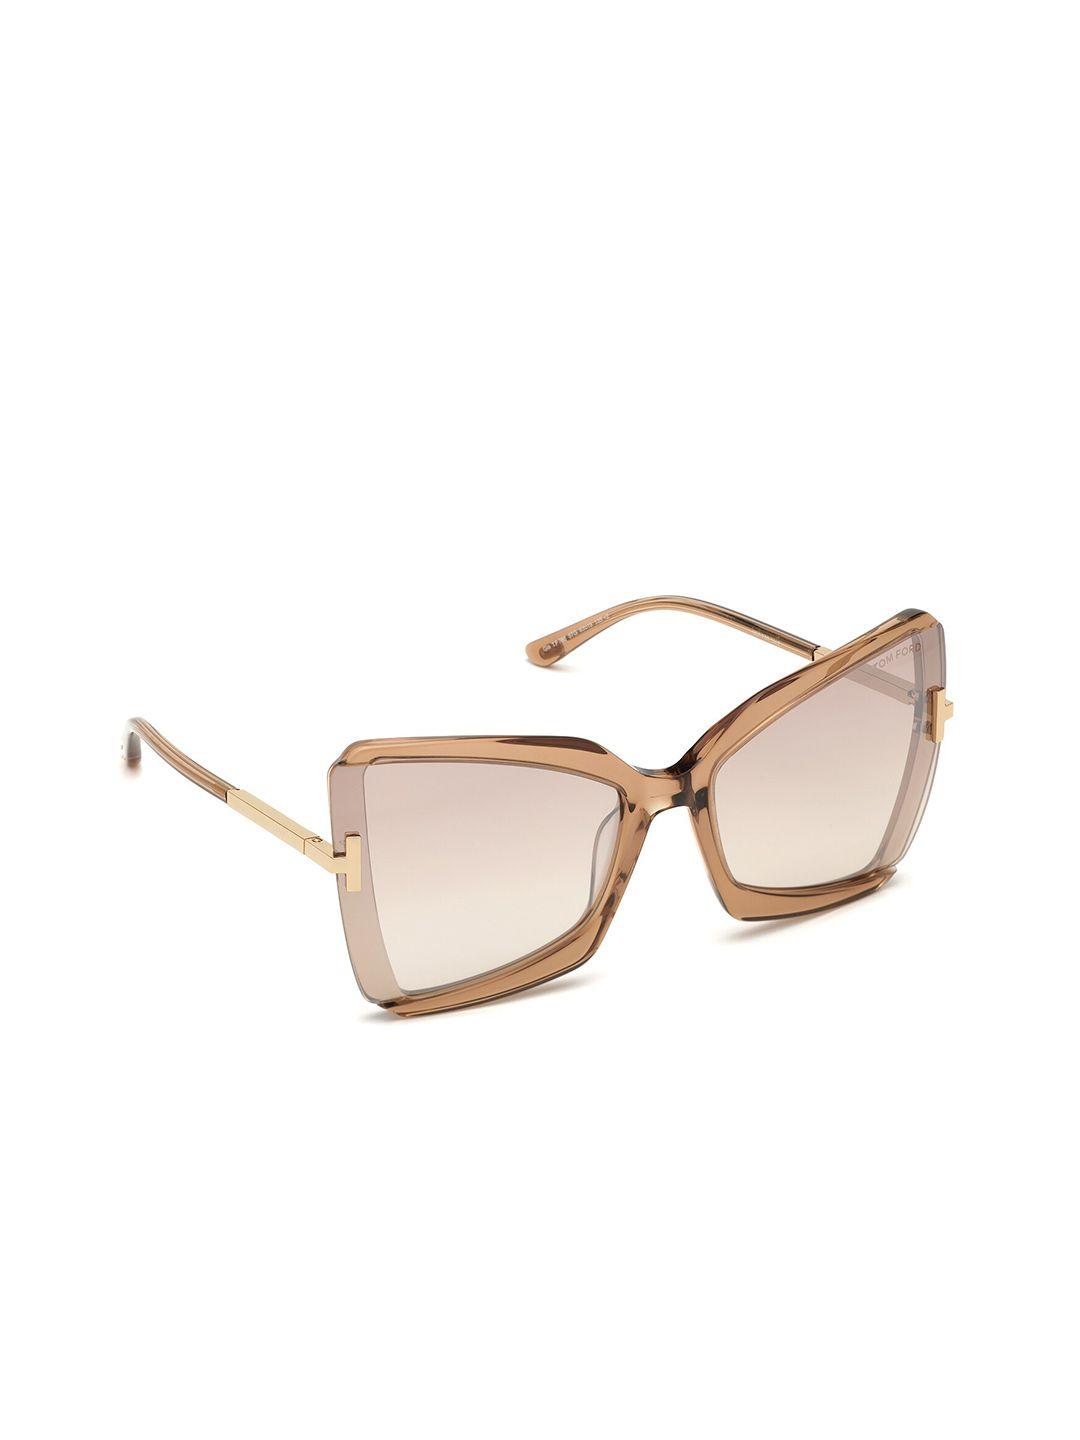 tom ford women square sunglasses with uv protected lens